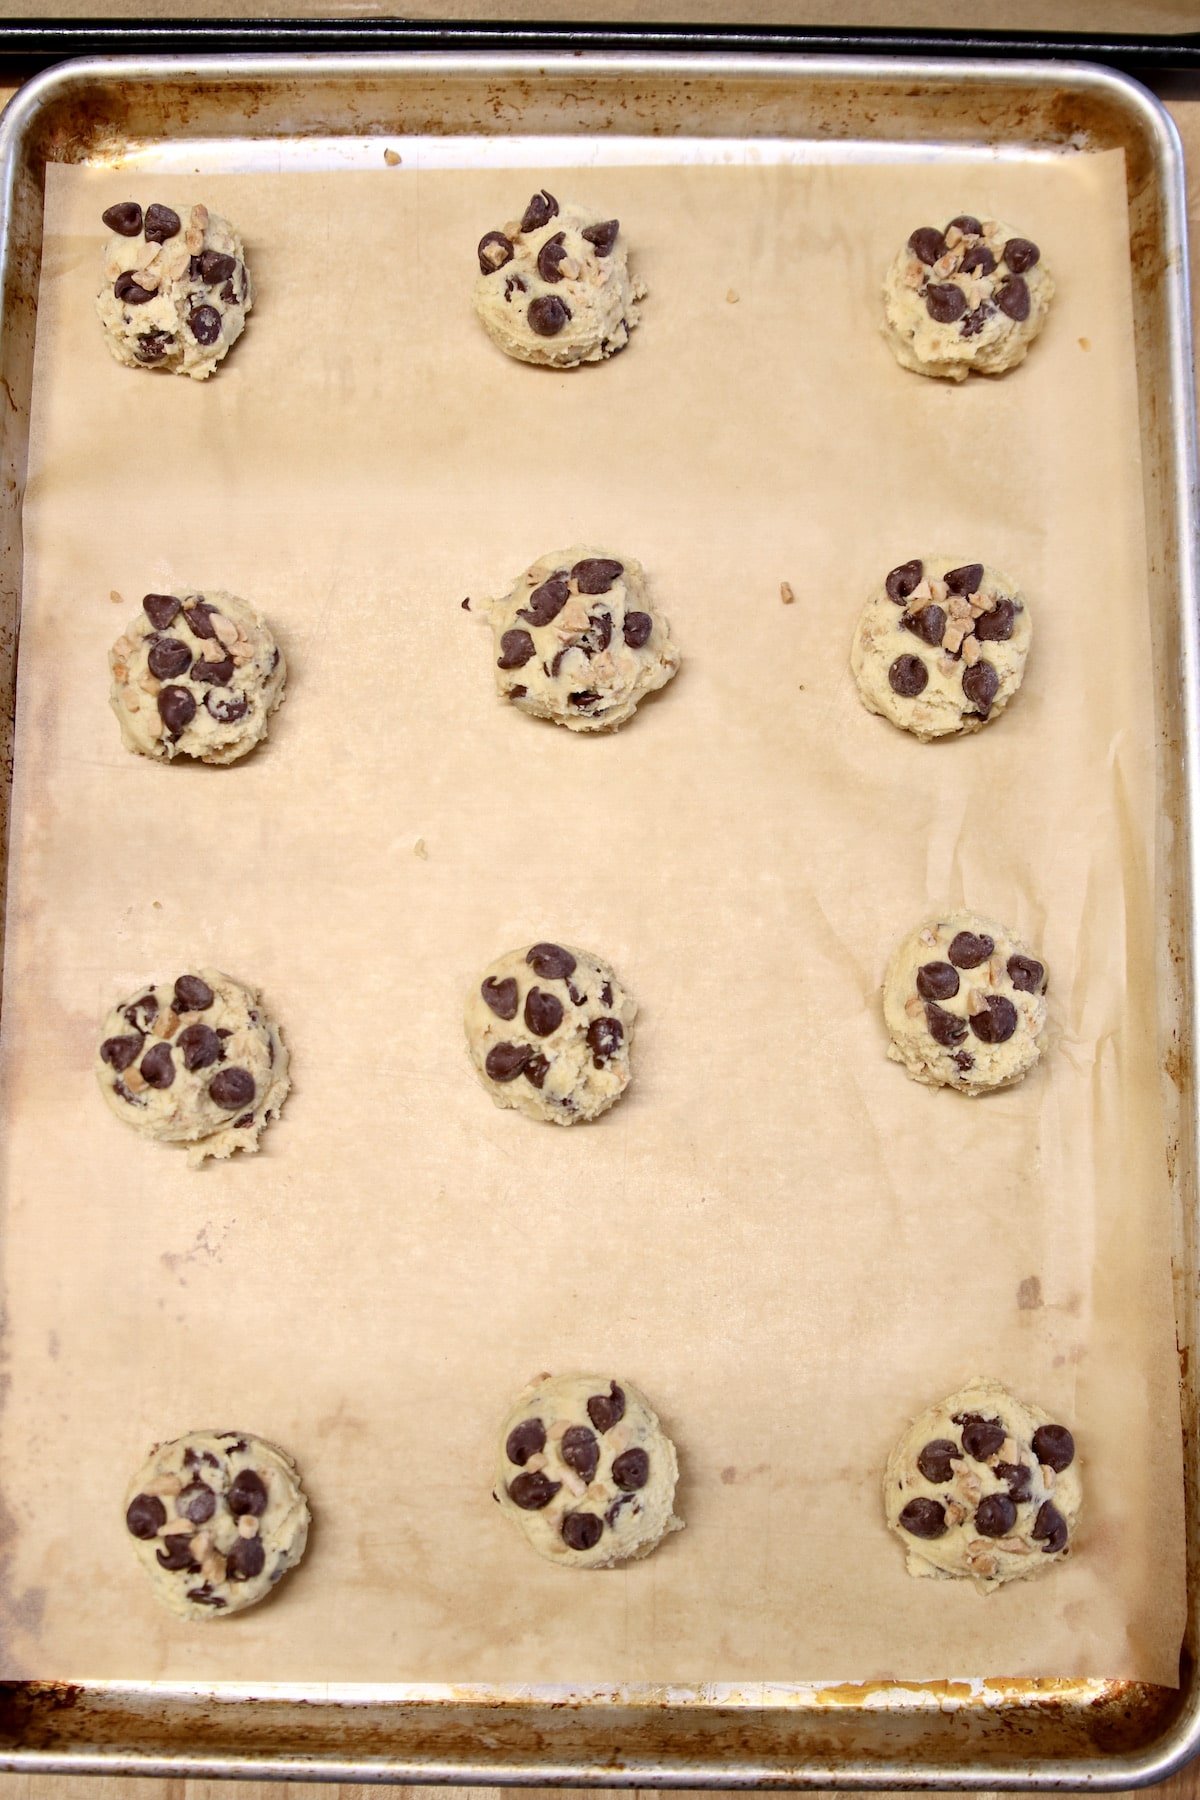 Baking sheet with chocolate chip cookie dough.